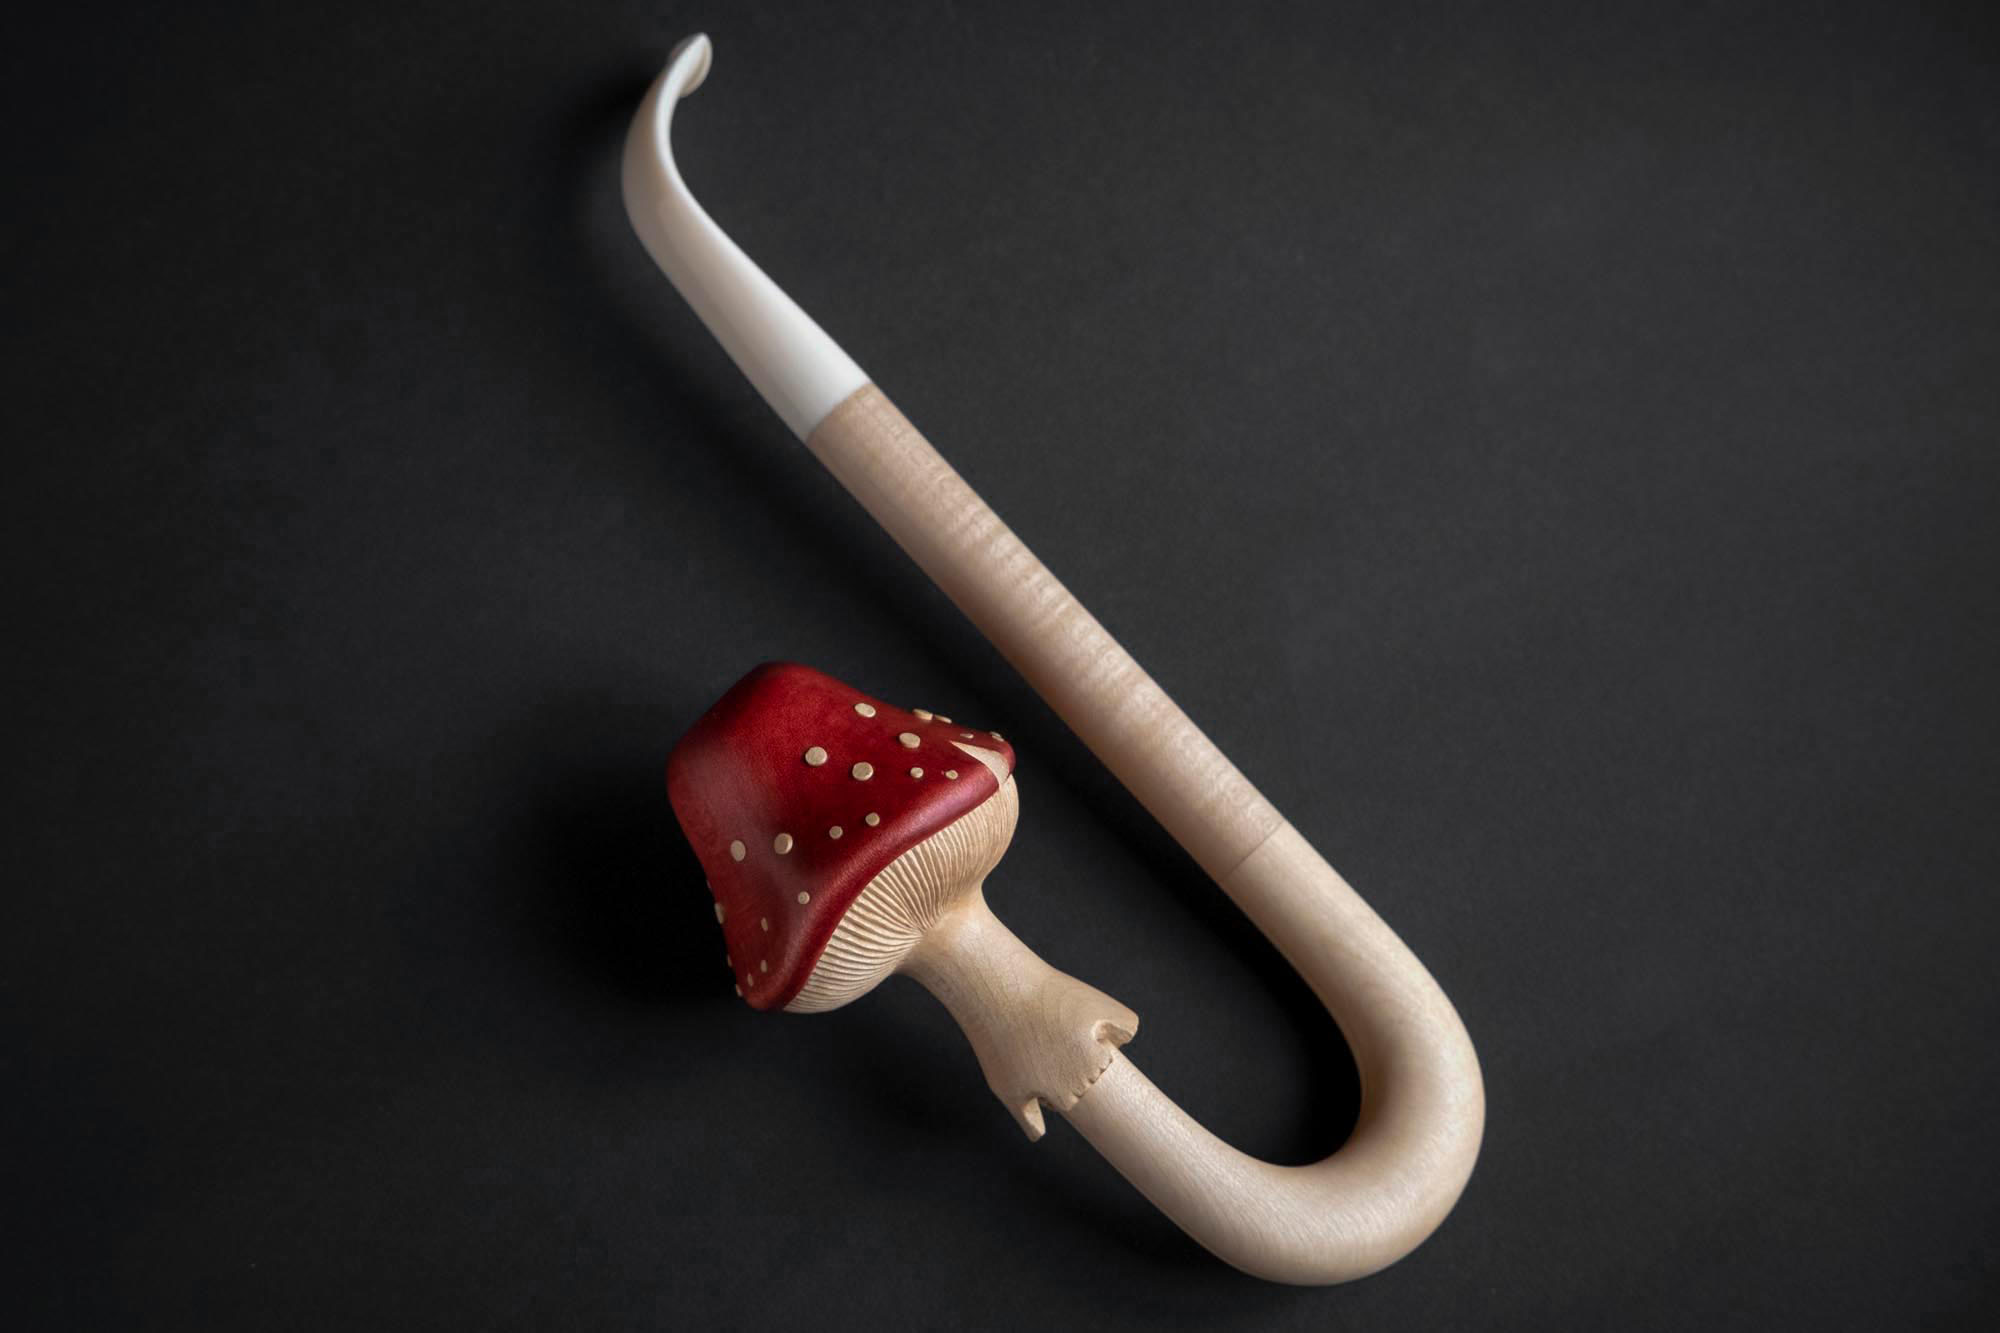 Mushroom Pipe (Amanita Muscaria), sculptural smoking pipe hand crafted by Arcangelo Ambrosi.